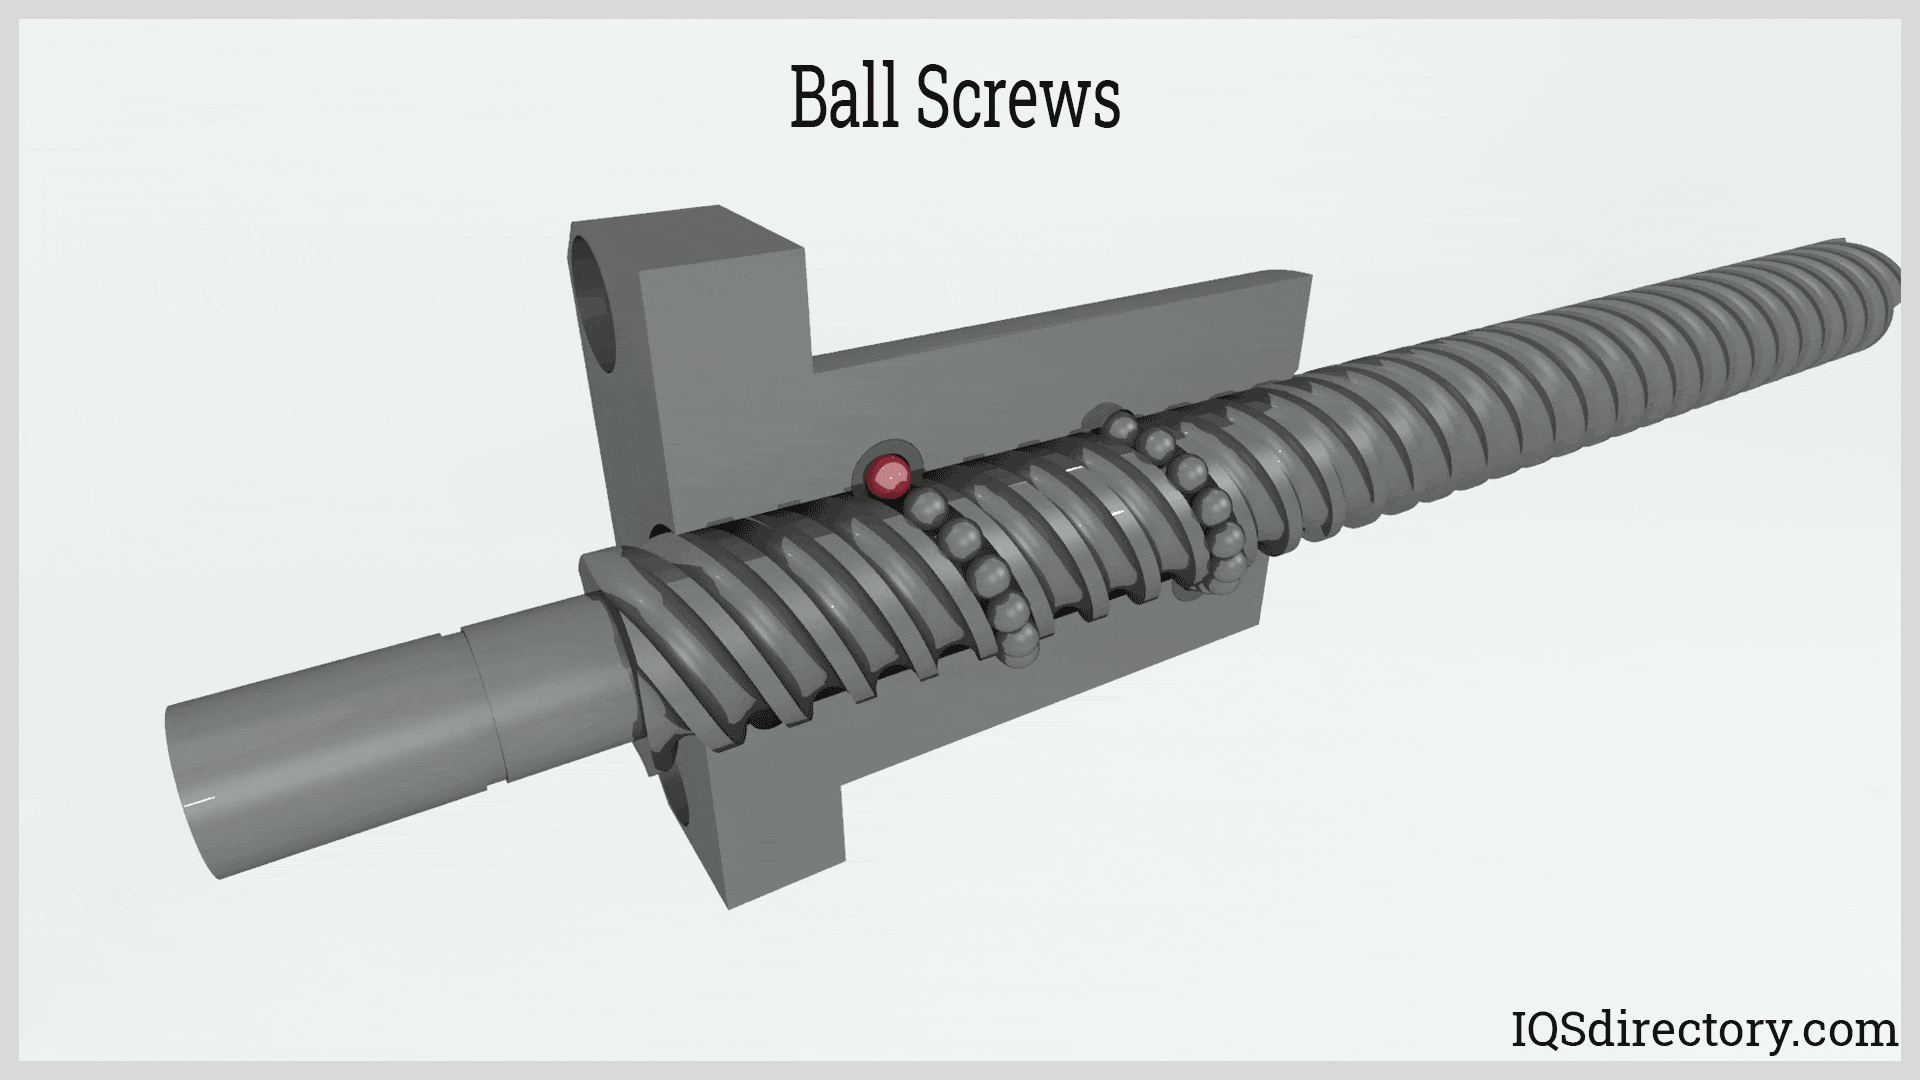 Ball Screw: What Is It? How Does It Work?